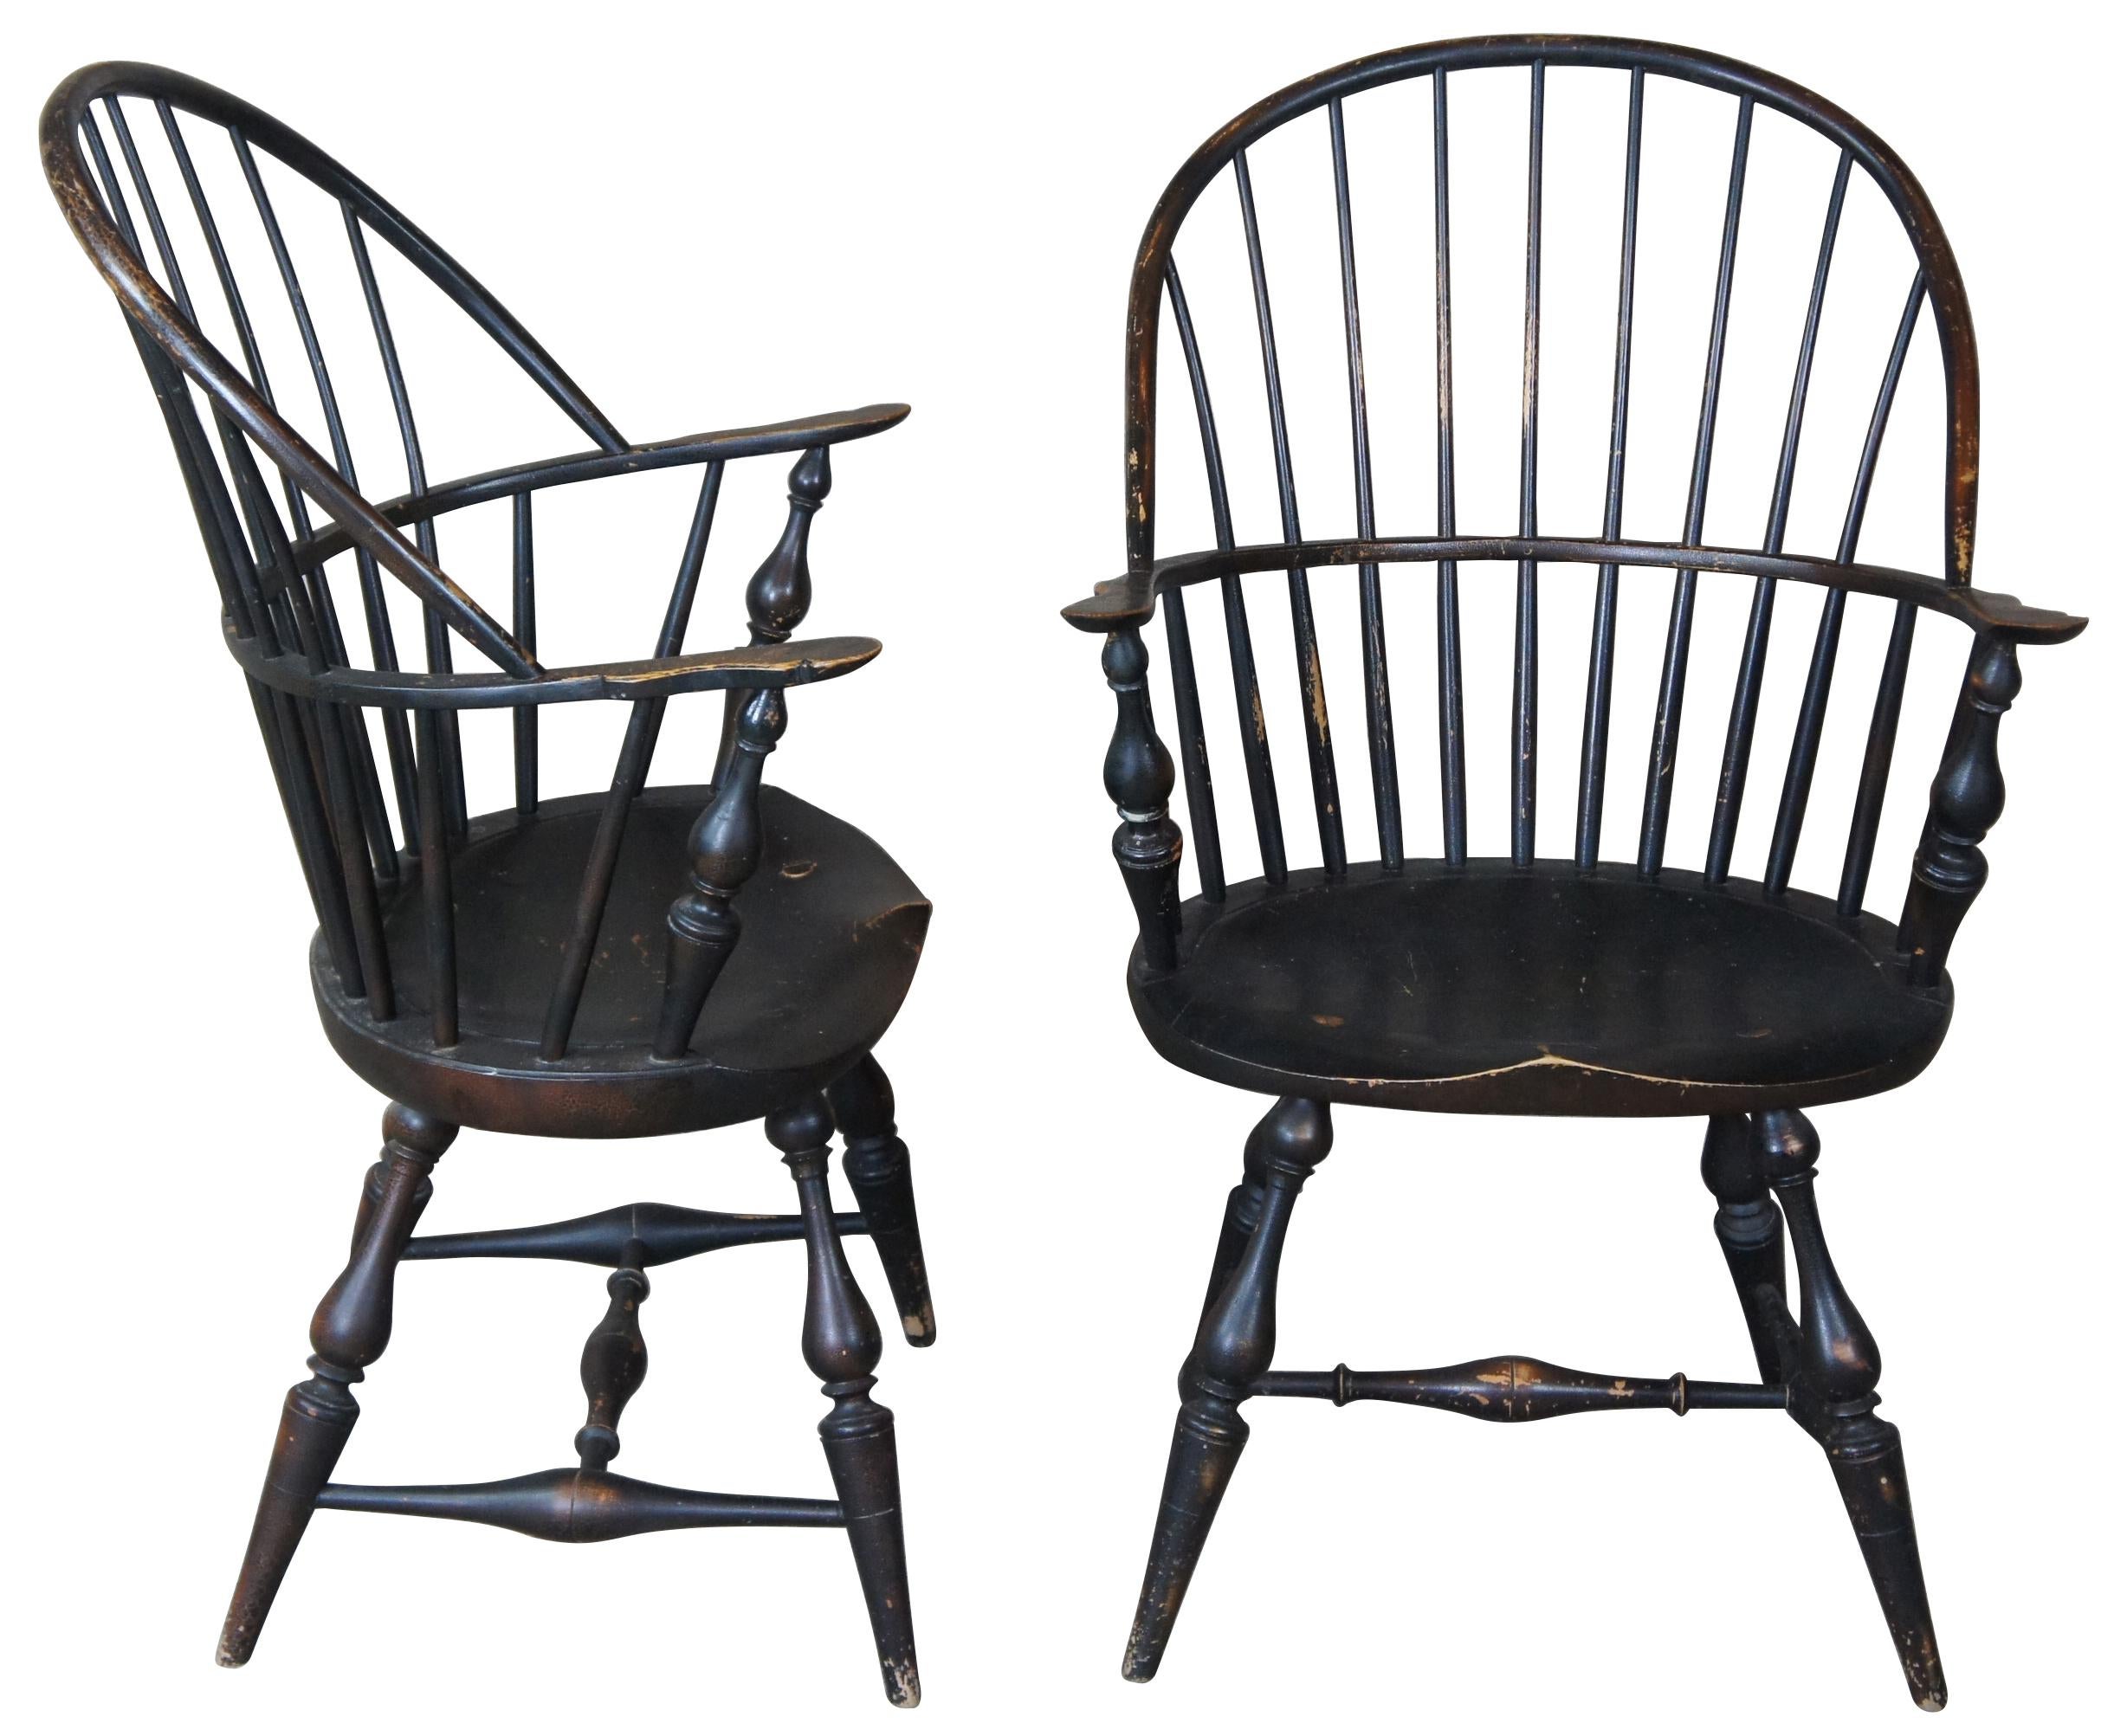 Late 20th century bow back Windsor armchairs by River Bend Chair Co. Features a black crackle finish with vase shaped legs.
  